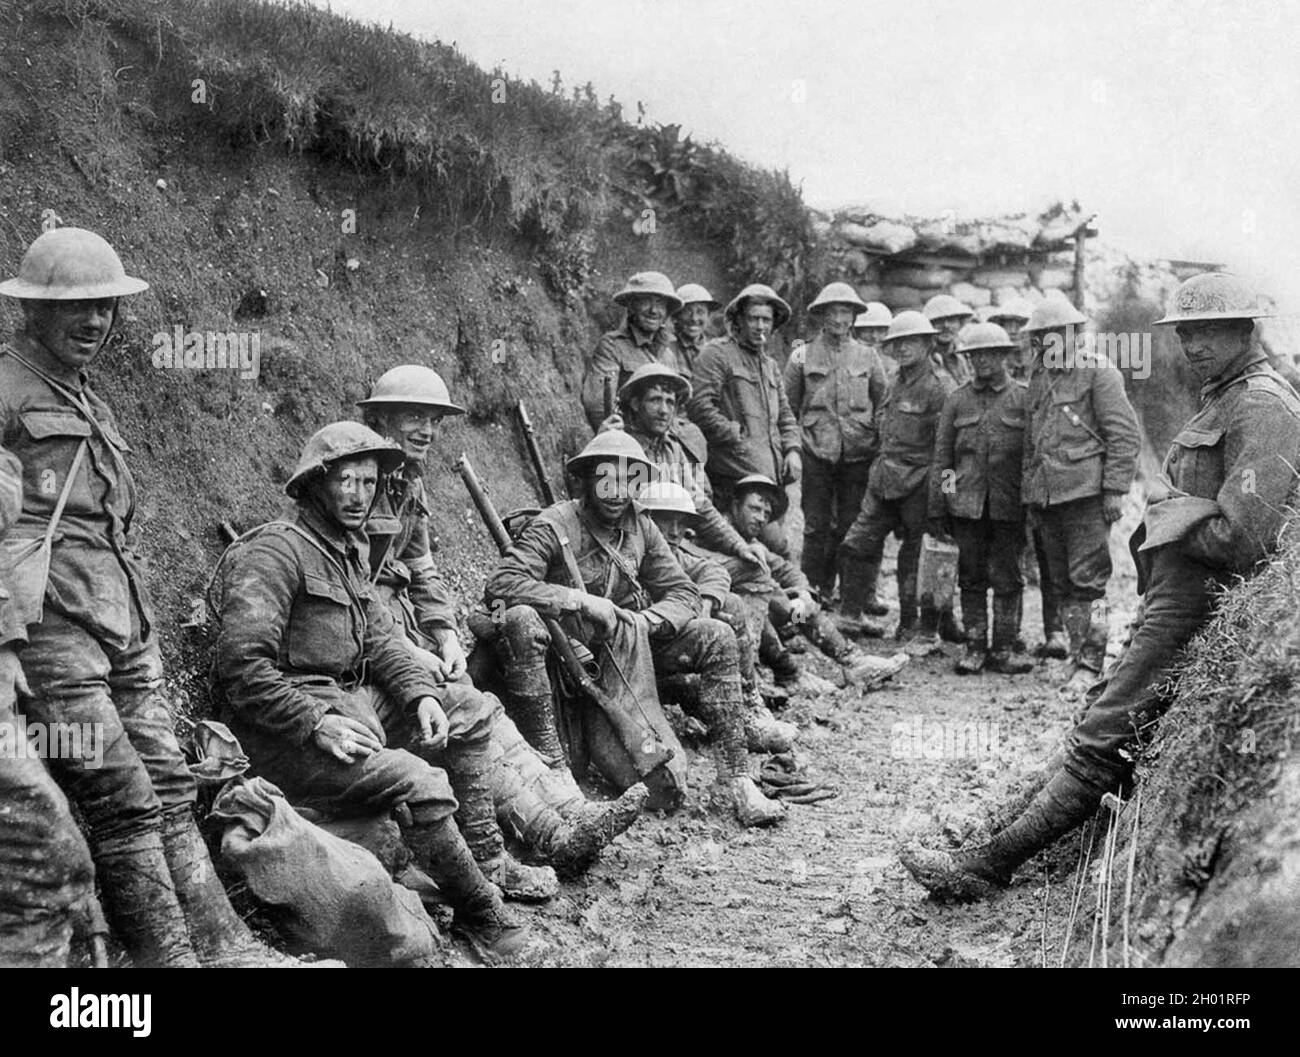 Soldiers from the Royal Irish Rifles rest during the opening hours of the Battle of the Somme. July 1, 1916. Stock Photo